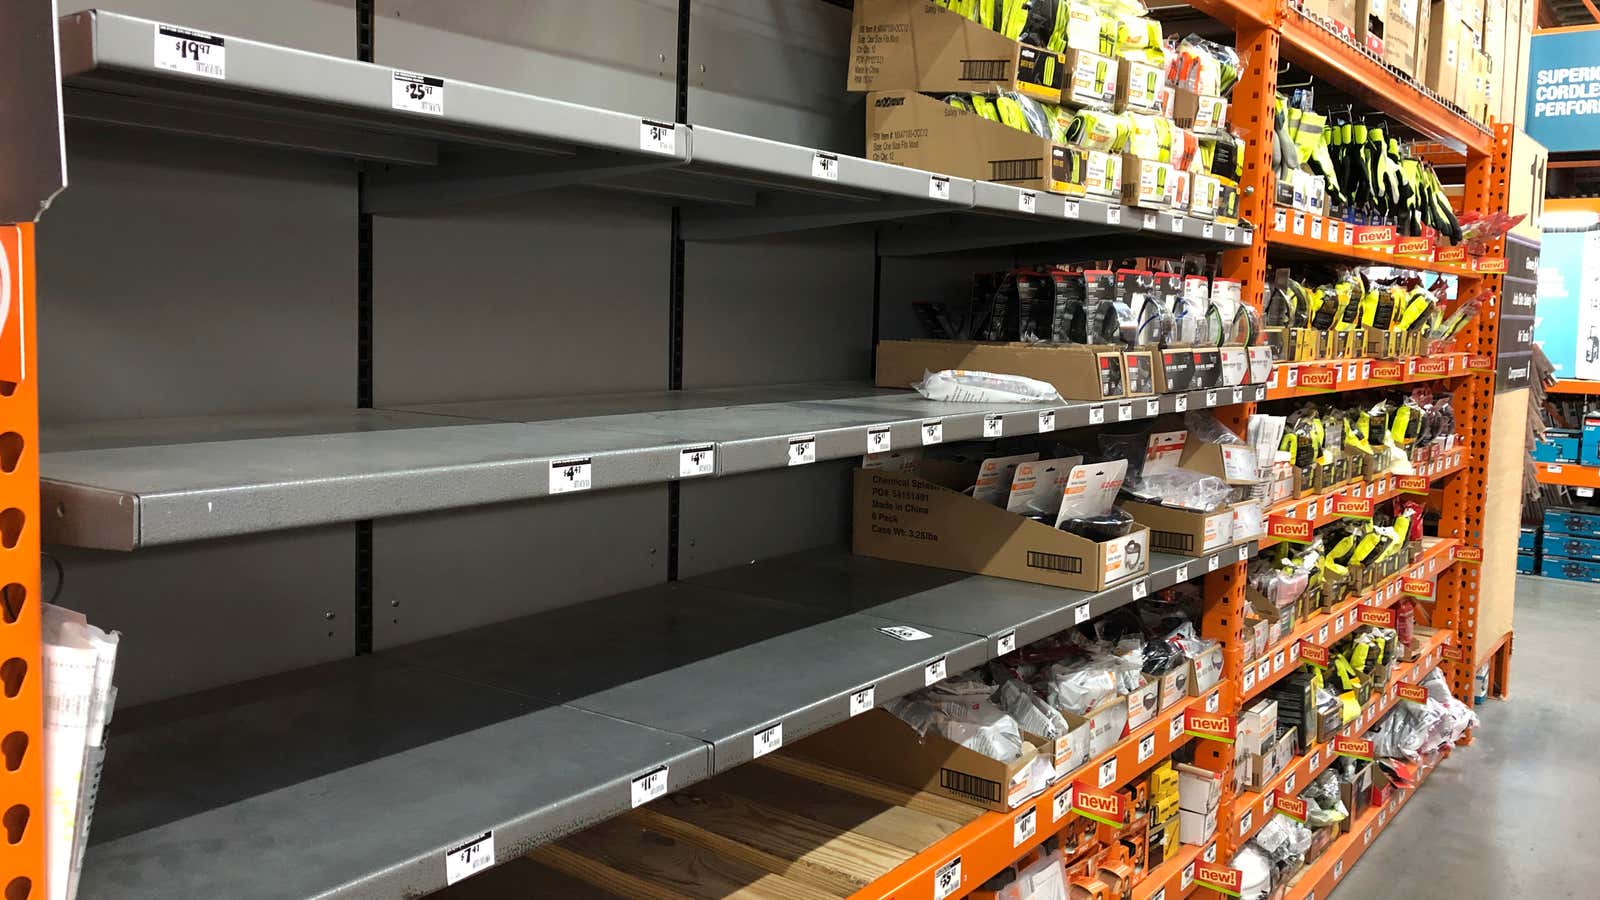 Hardware stores’ shelves were allegedly emptied to fill orders on Amazon.